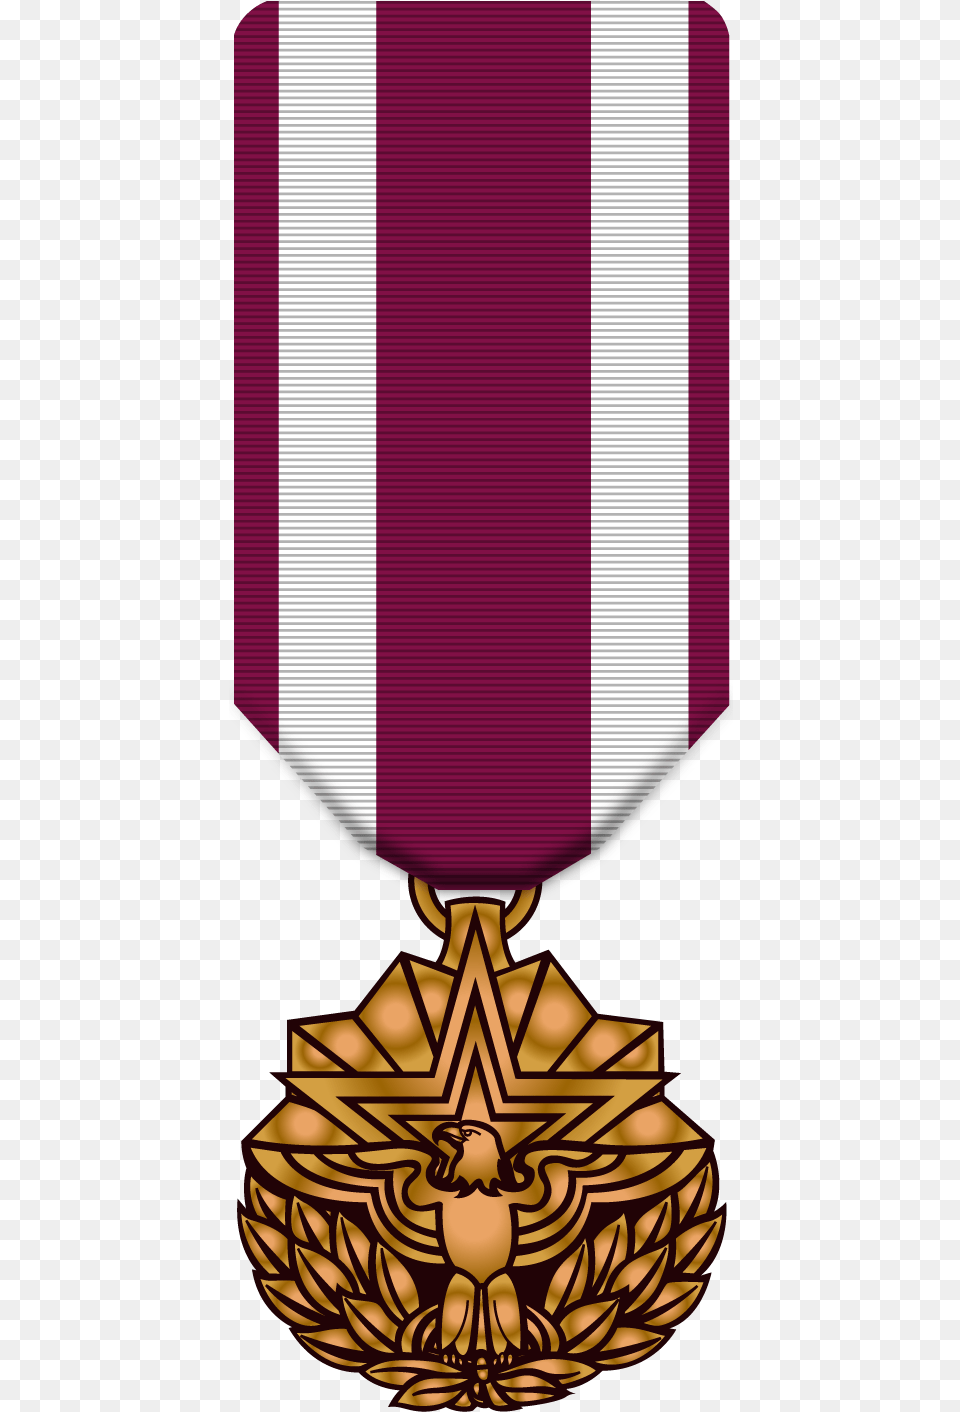 Purple Clipart Medal Transparent Free For Meritorious Service Medal, Gold, Lamp, Trophy, Gold Medal Png Image